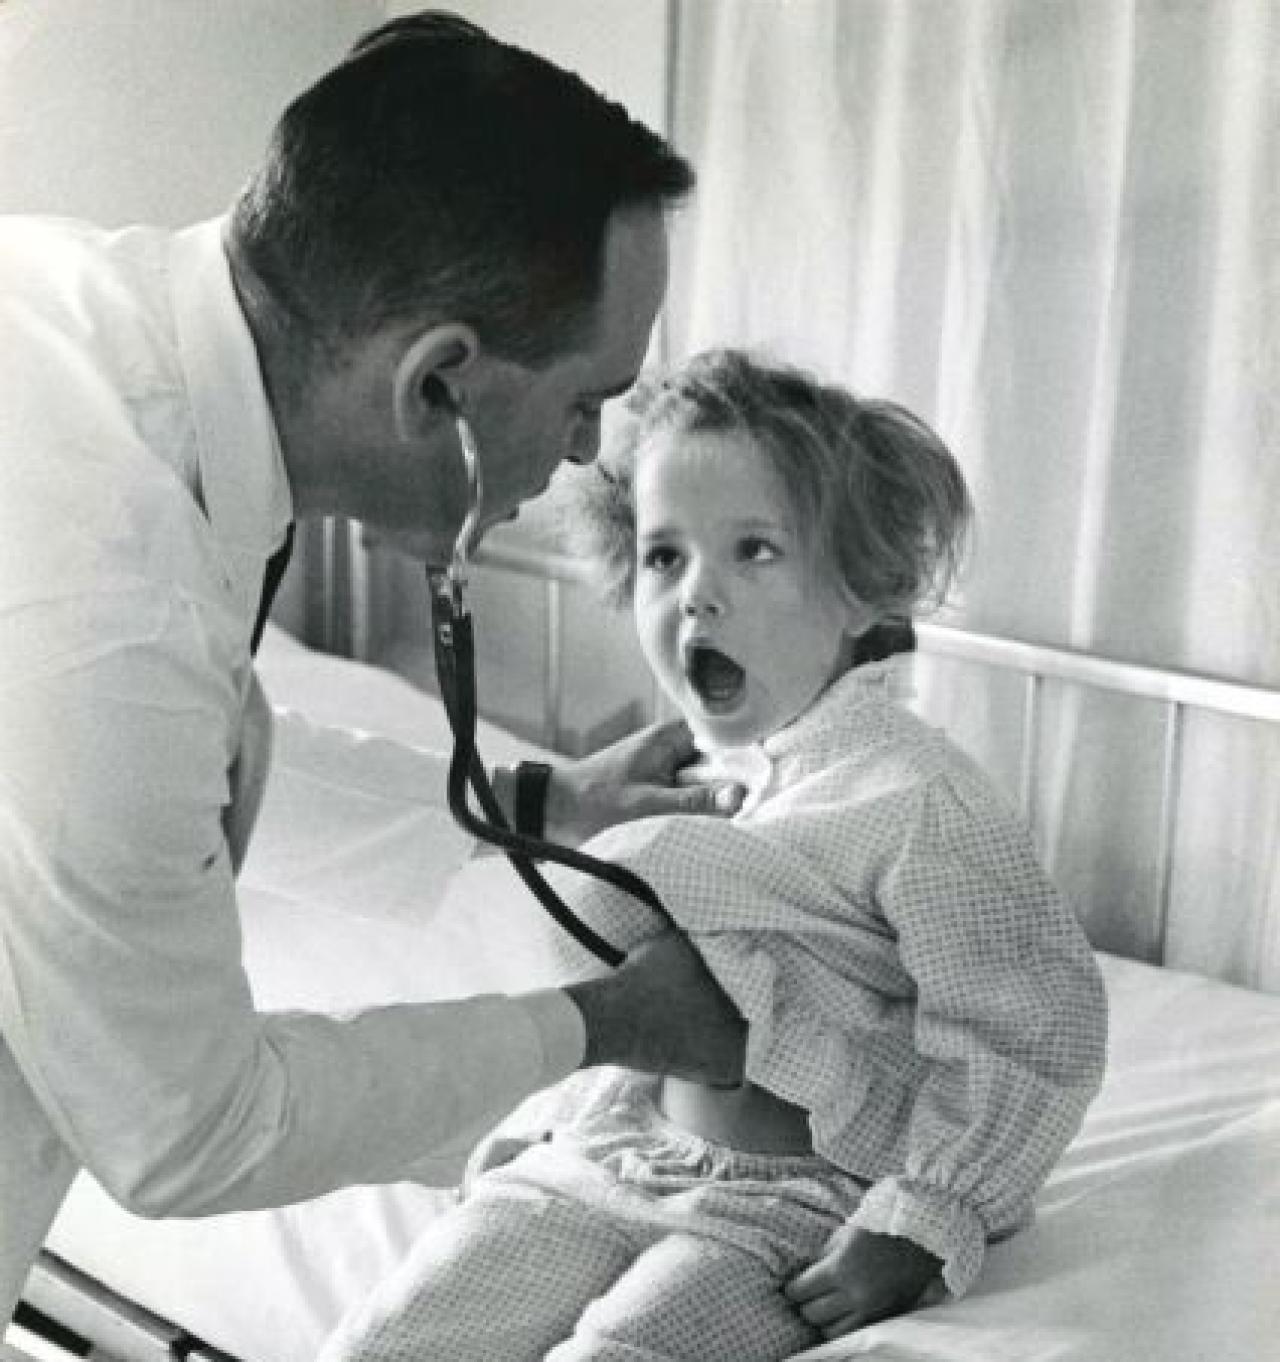 Doctor examining a young child